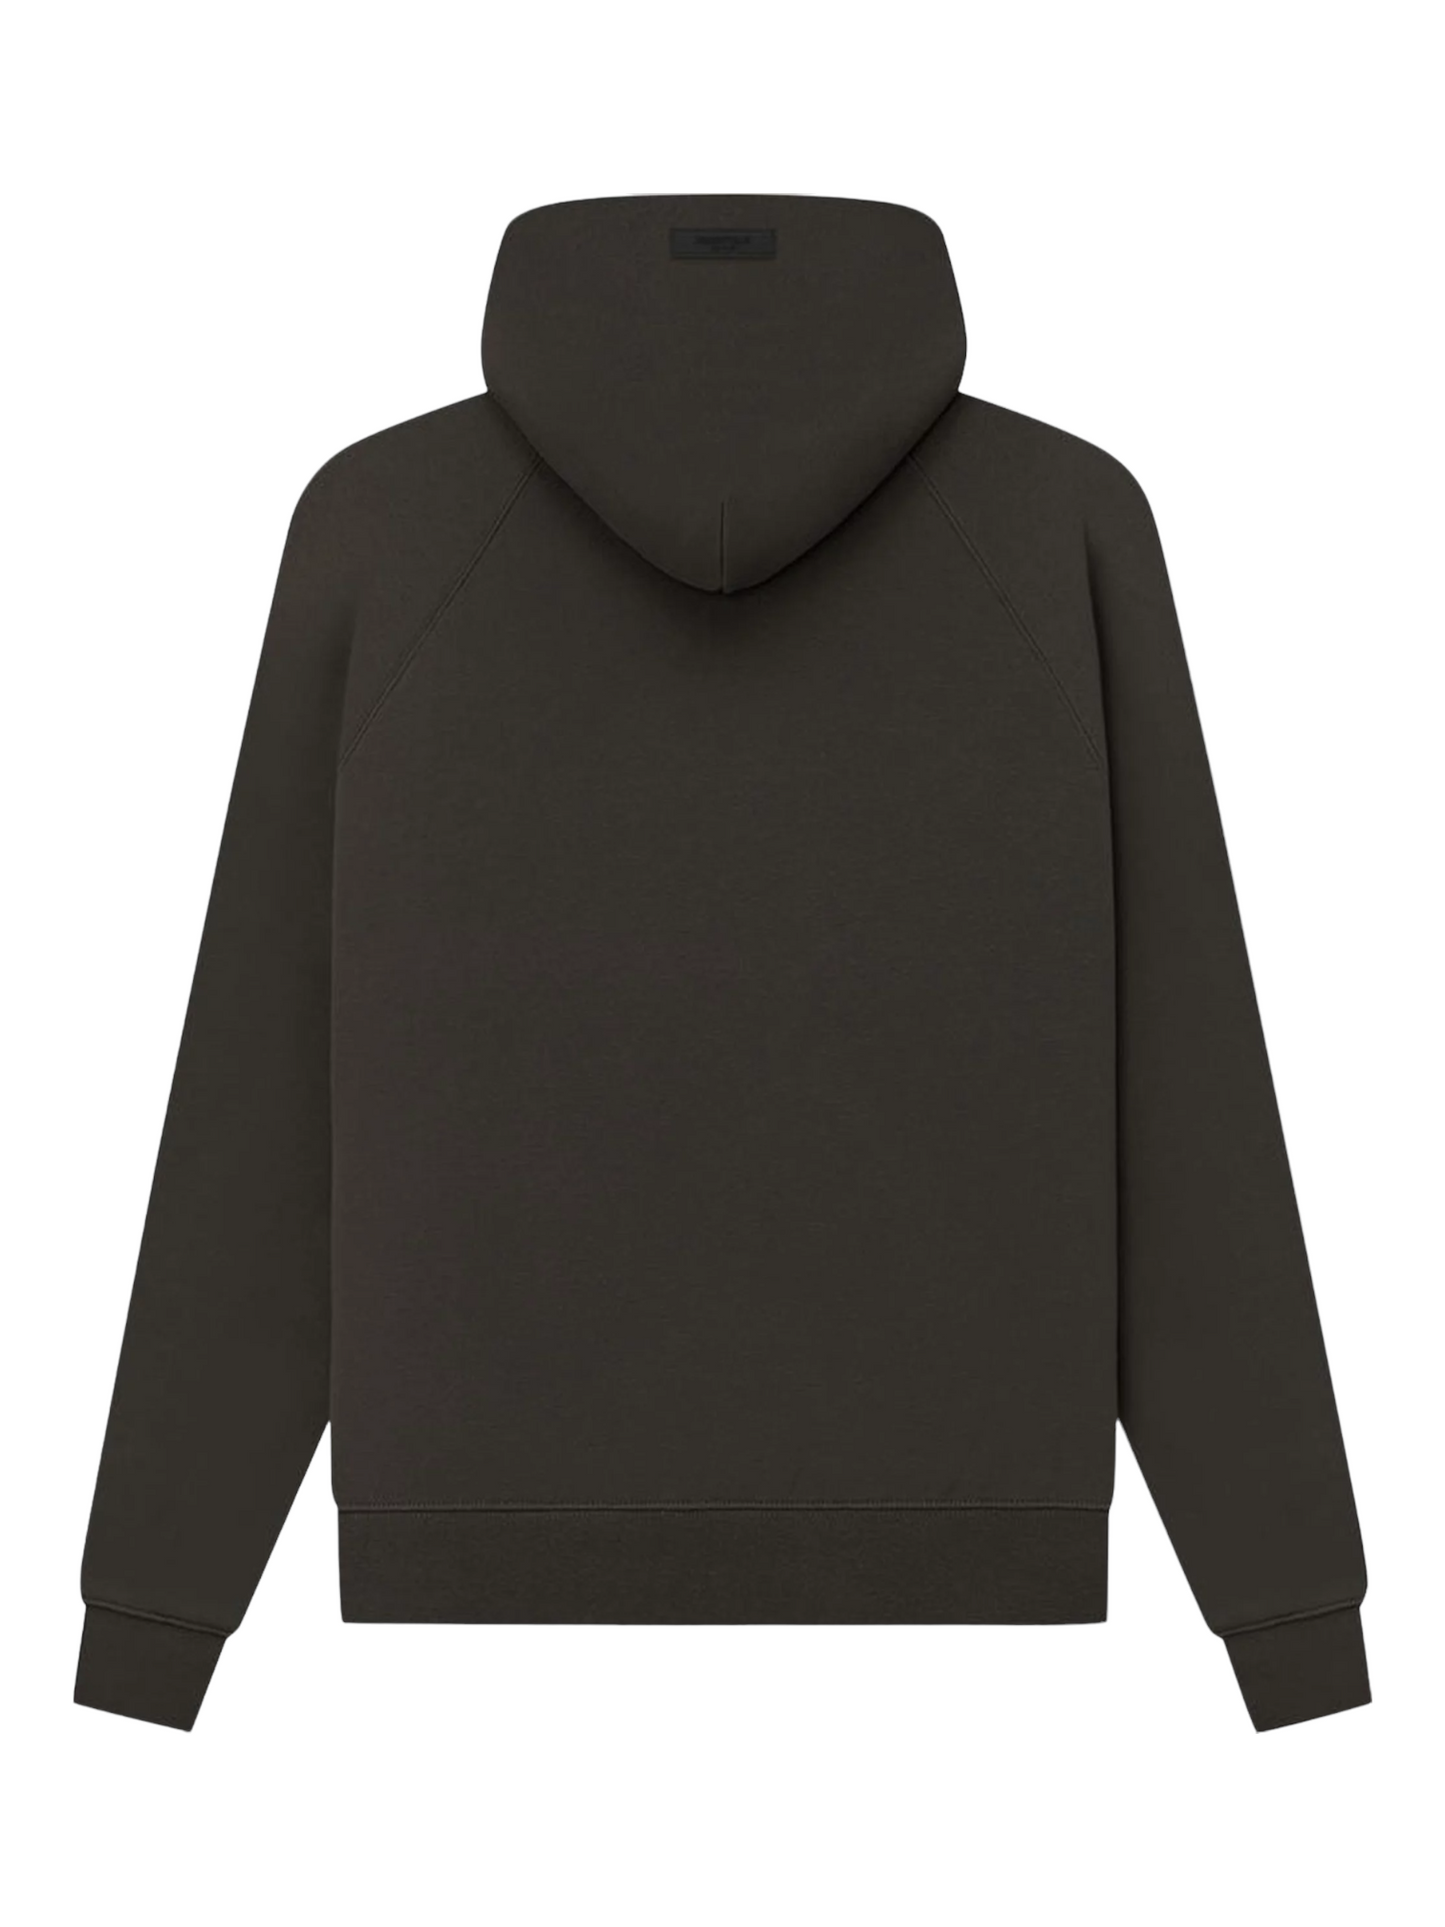 Essentials Fear of God Off Black Fleece Hoodie SS23 — Genuine Design Luxury Consignment Calgary, Alberta, Canada New & Pre-Owned Clothing, Shoes, Accessories.